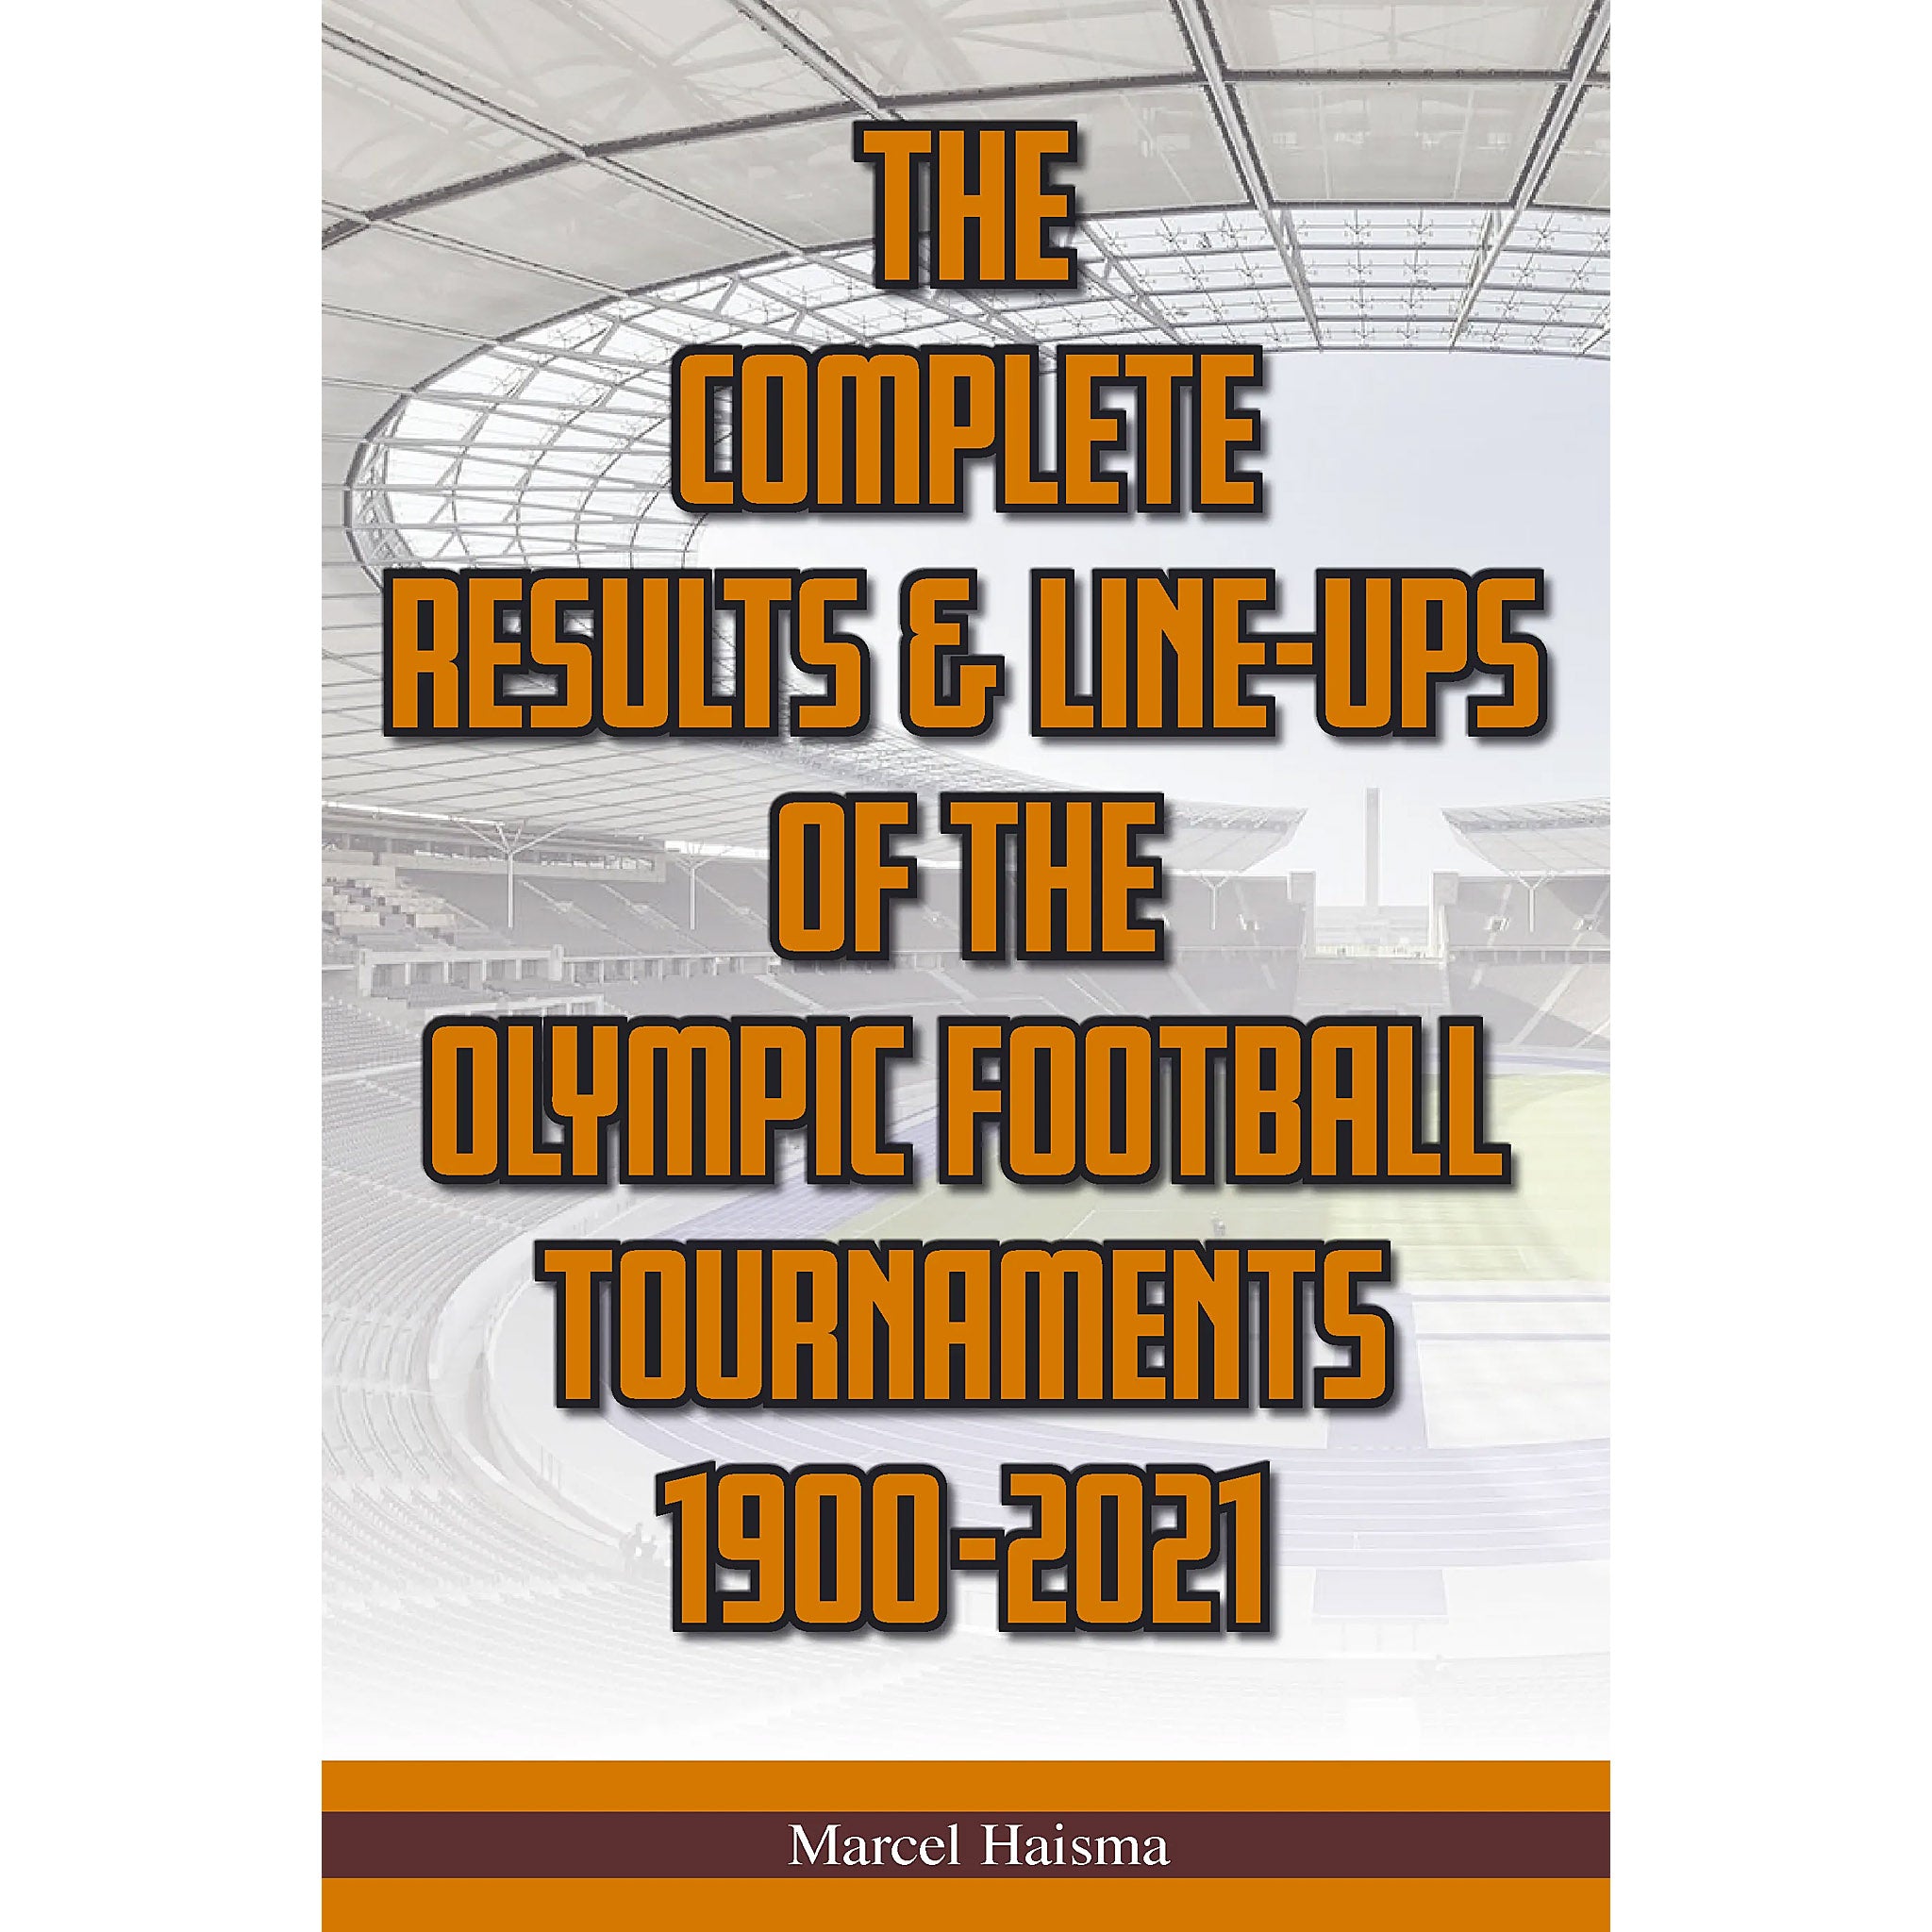 The Complete Results & Line-ups of the Olympic Football Tournaments 1900-2021